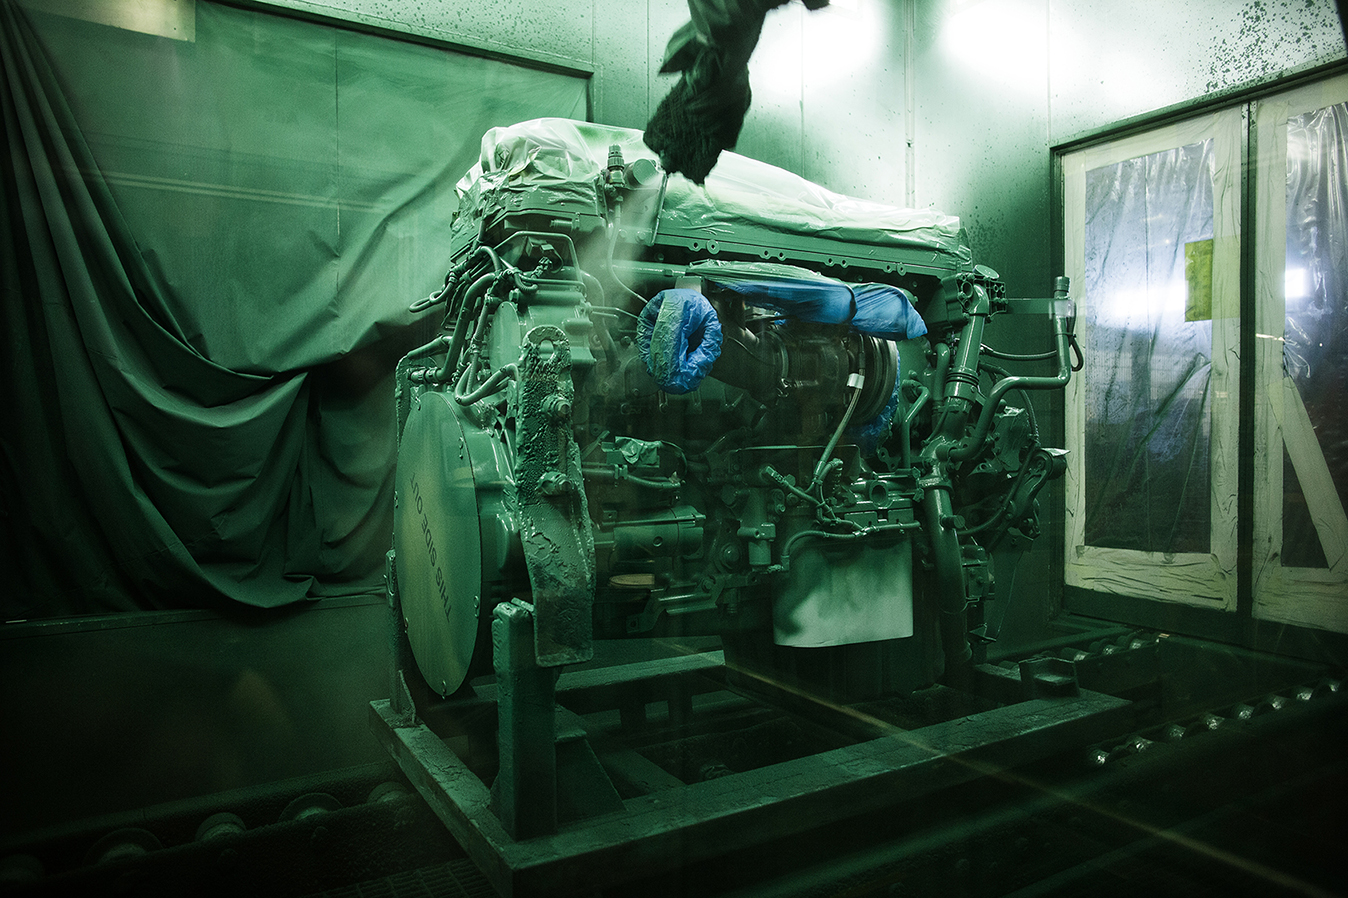 The engine paintshop, where all Volvo trucks are painted in an environmentally optimised process